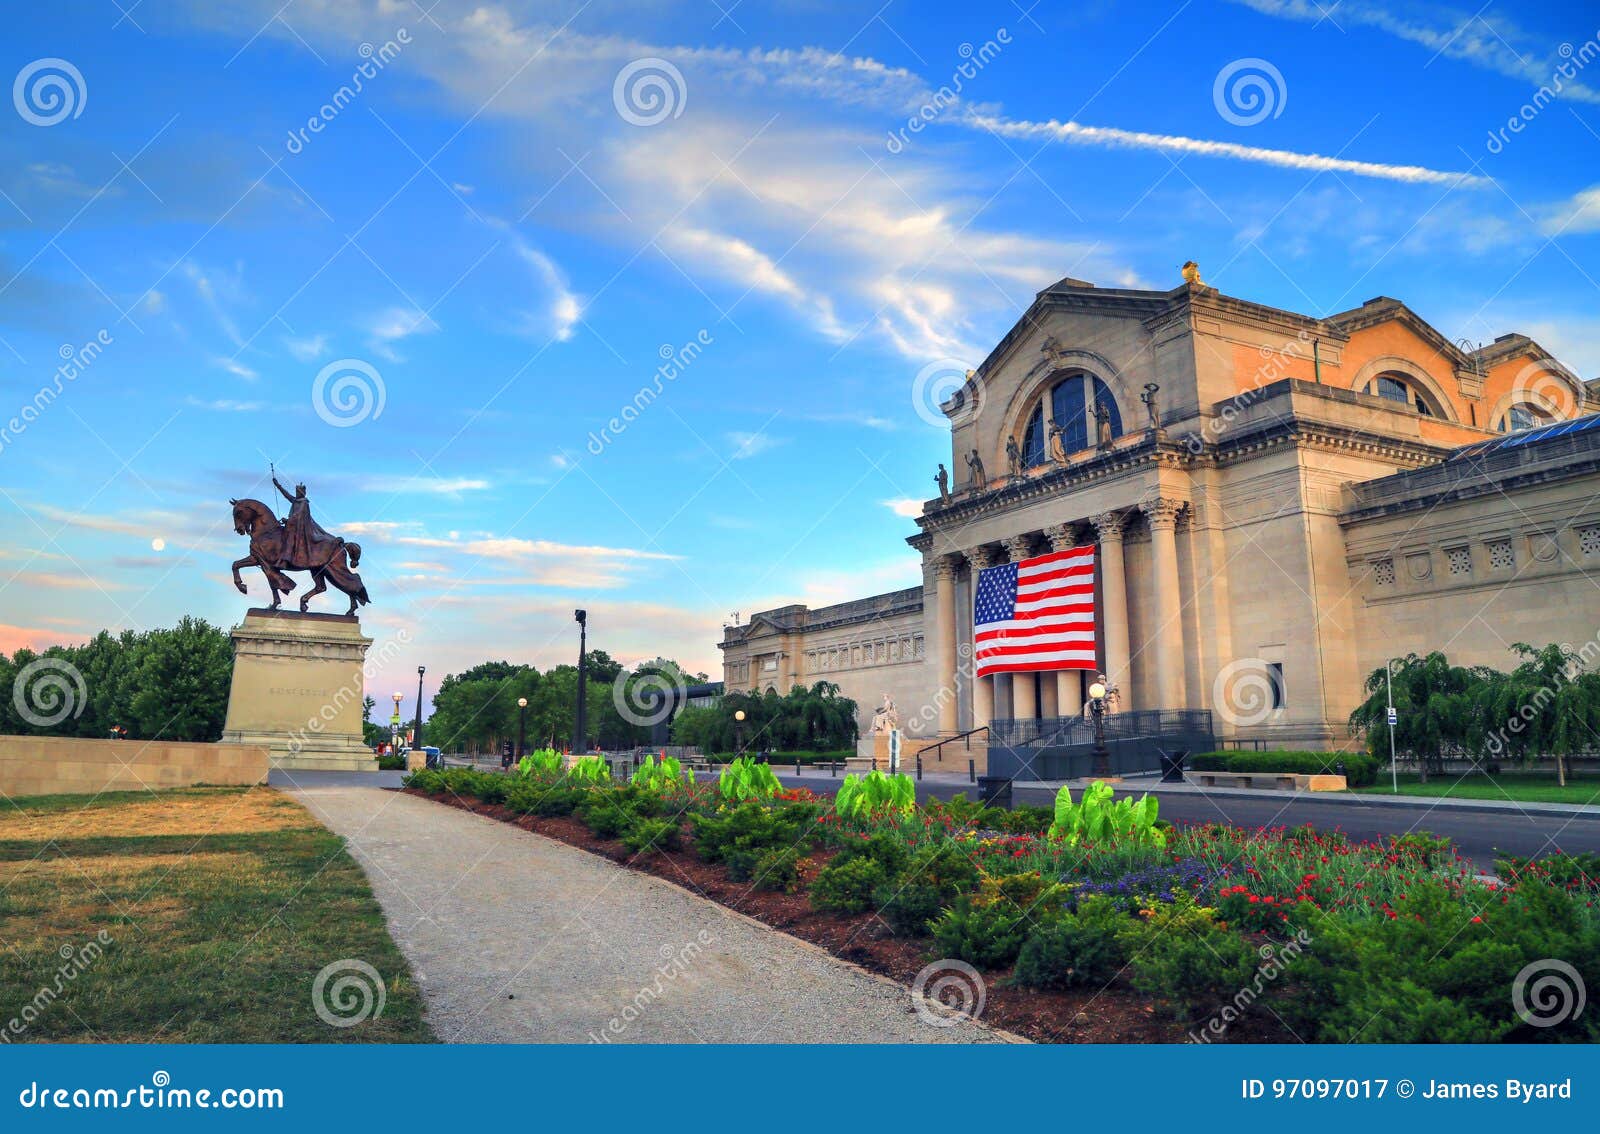 Art Hill In St. Louis, Missouri Stock Image - Image of statue, sculpture: 97097017